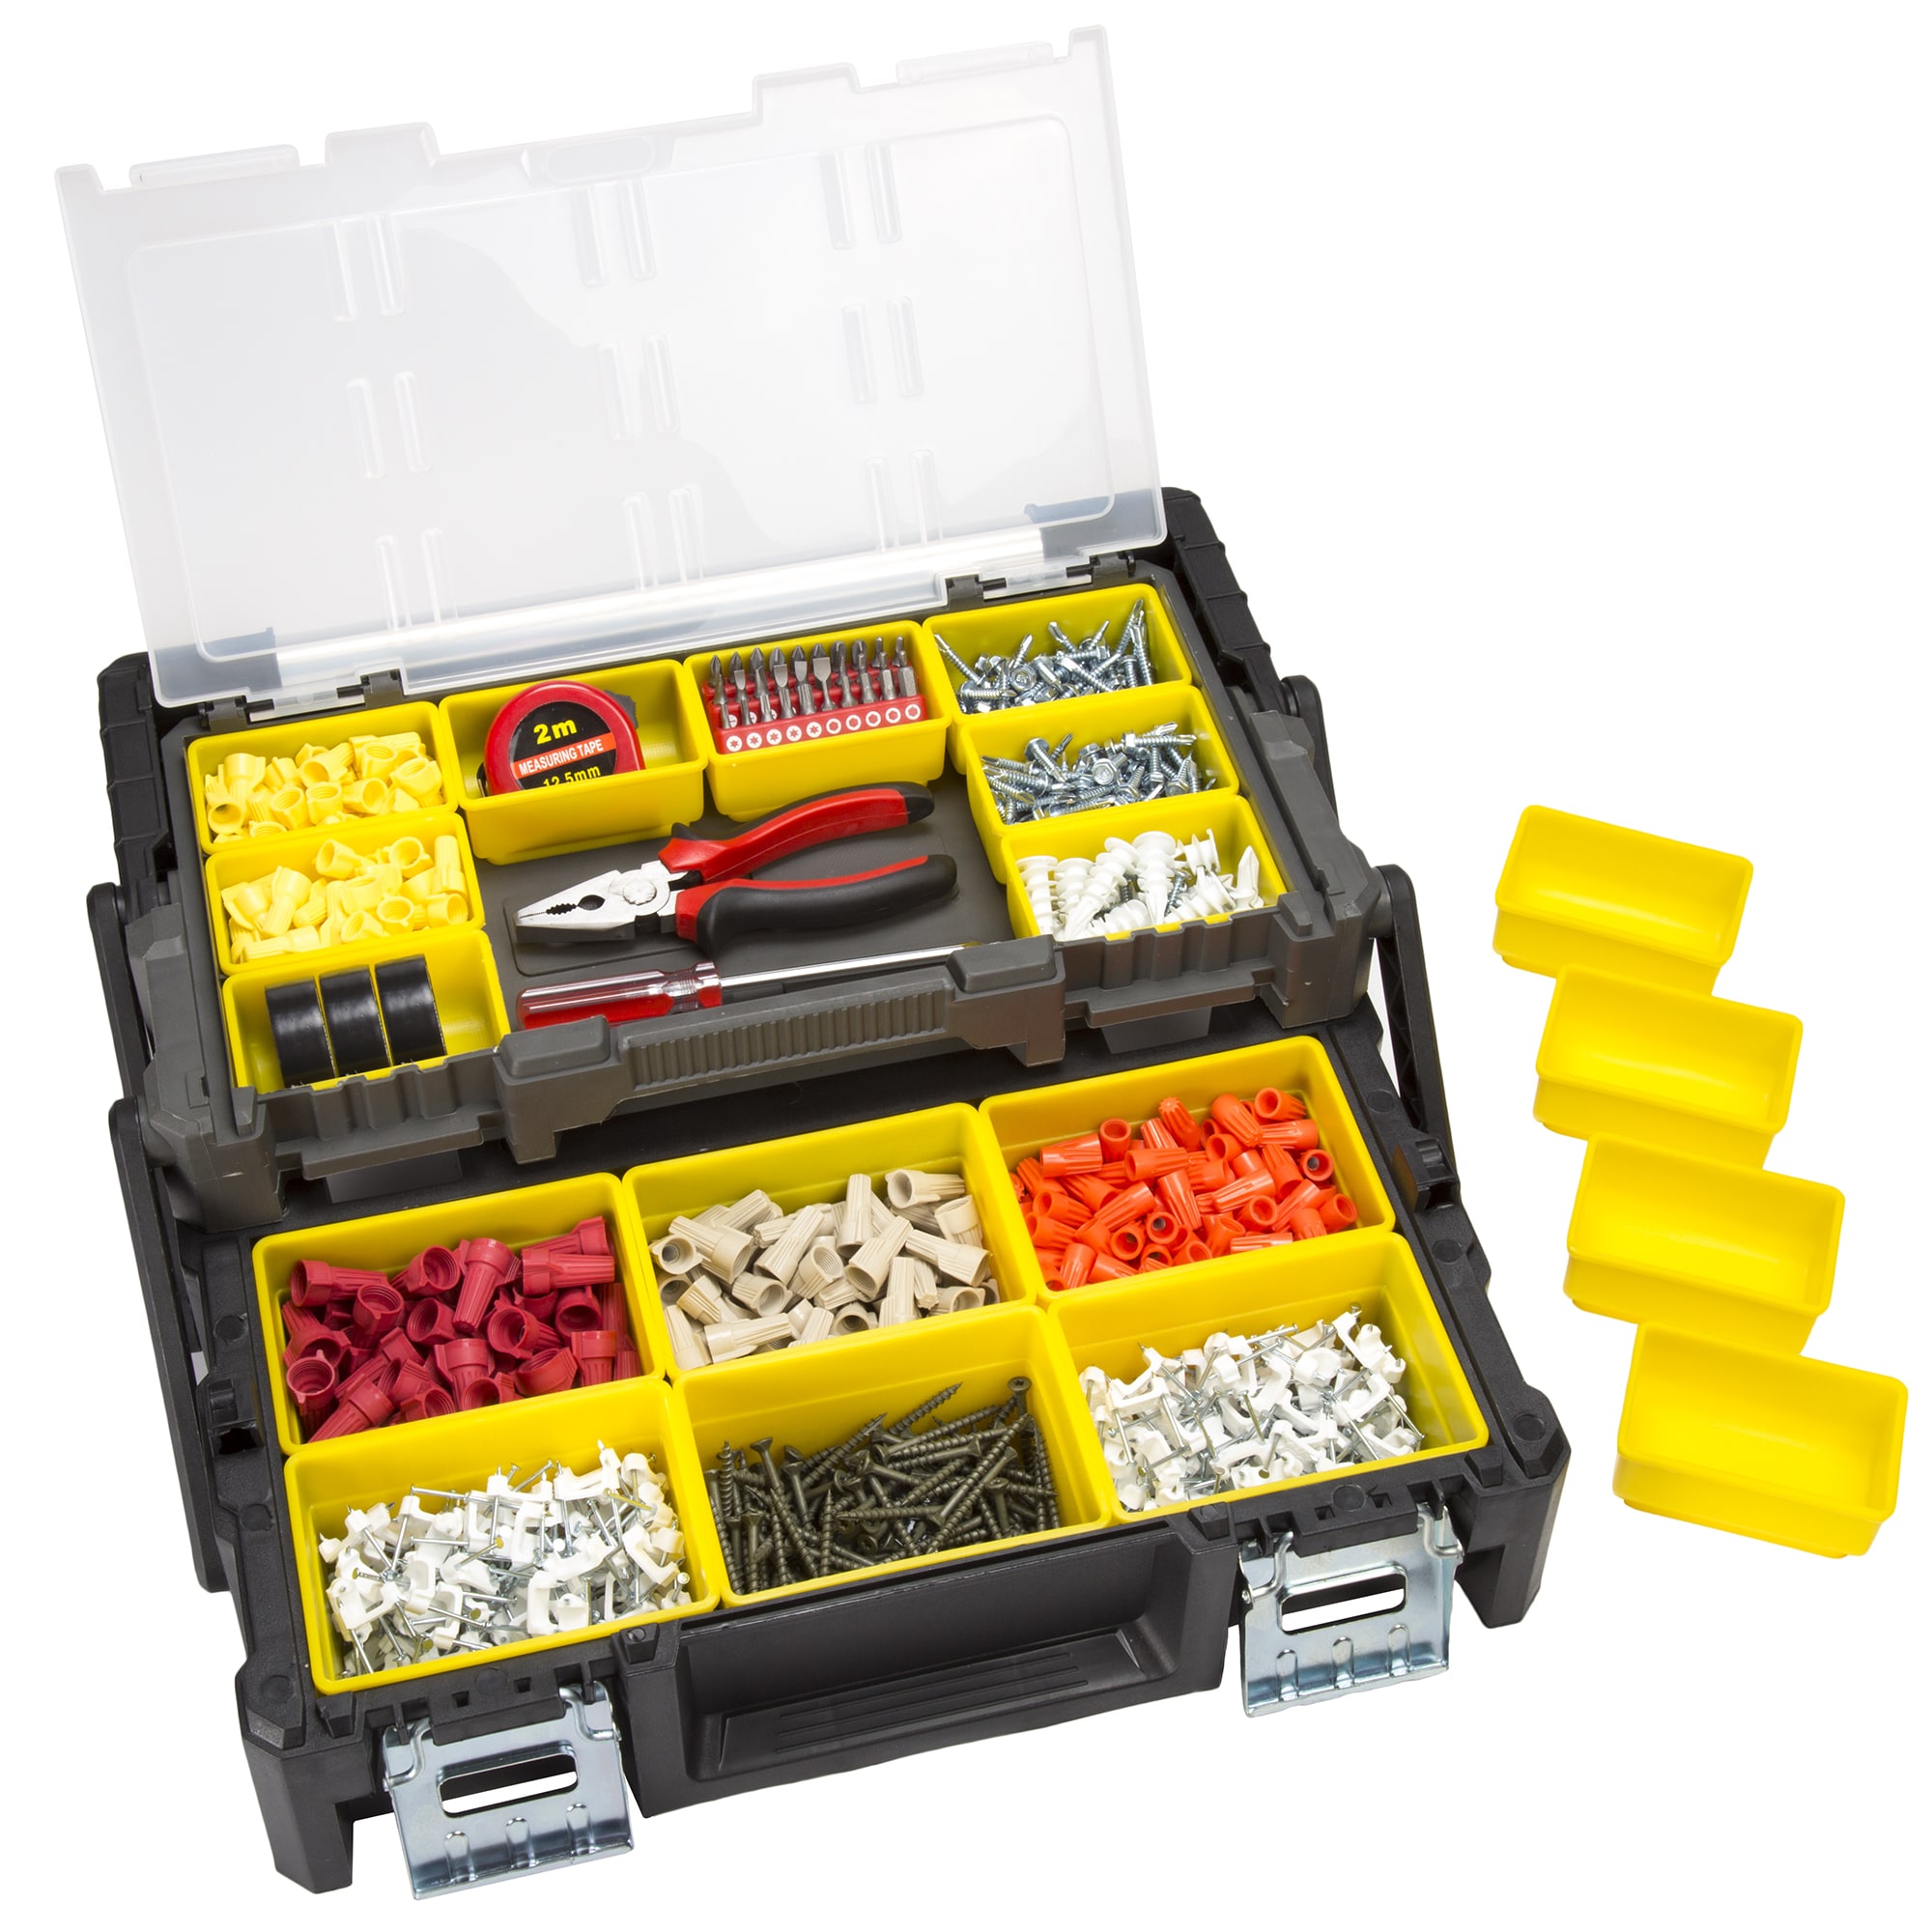 Stalwart 18-Compartment and Removable Tray Portable Tool Box